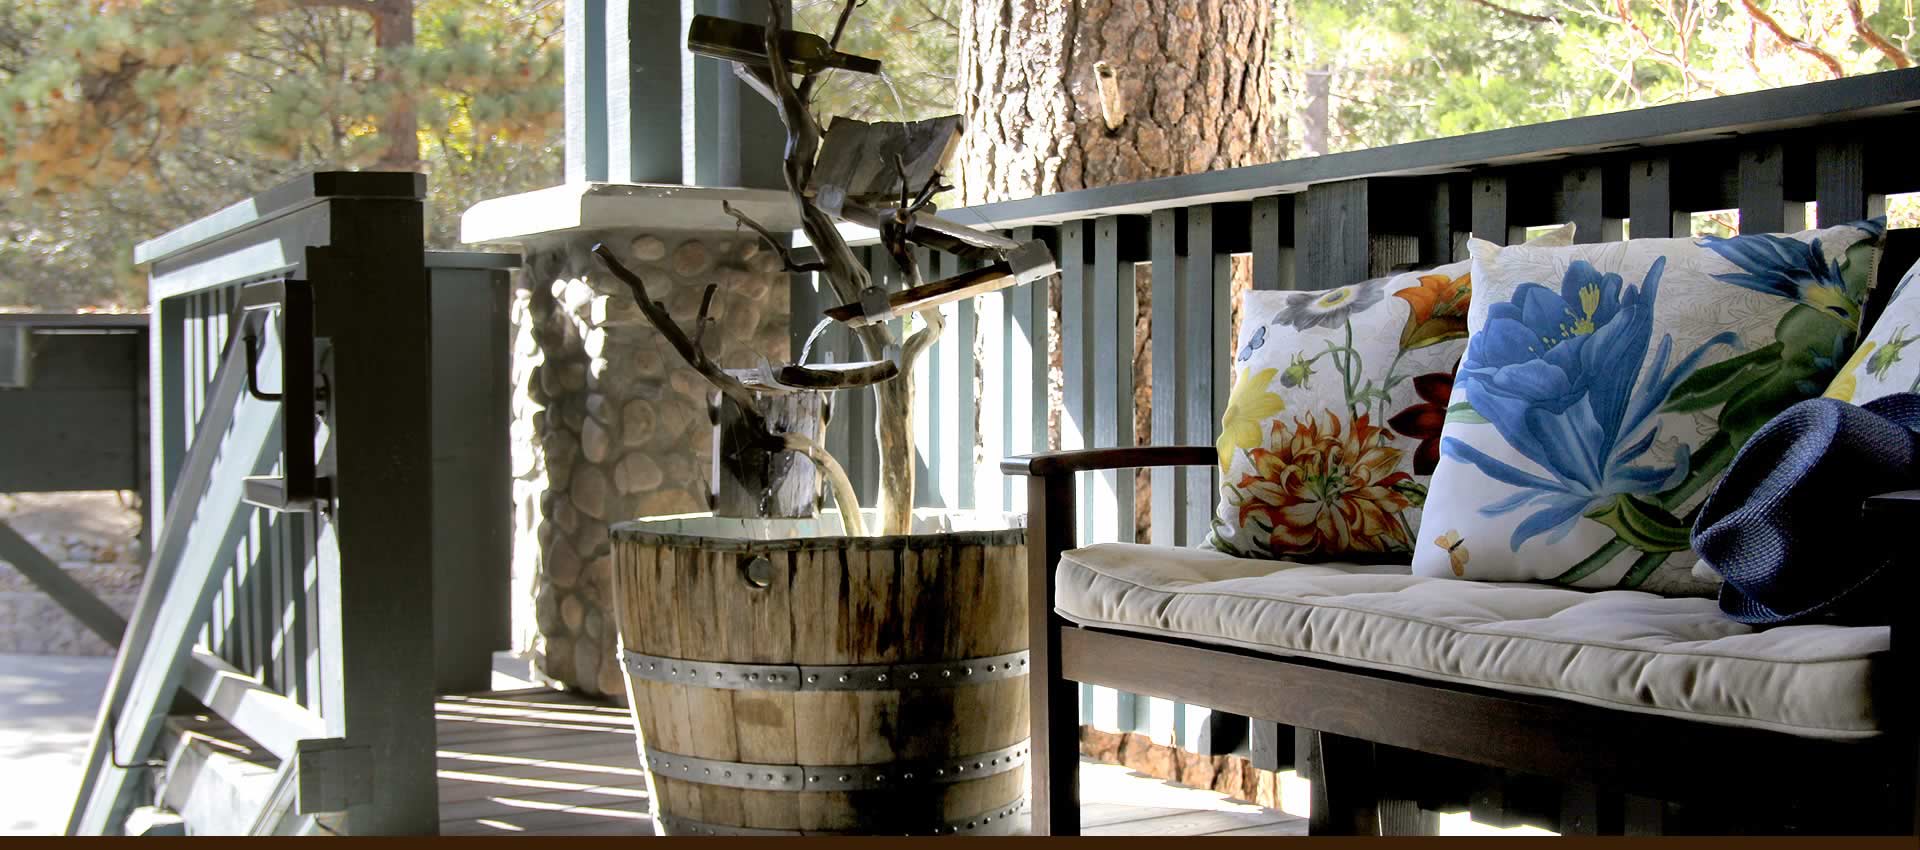 Grand Idyllwild Lodge front porch bench with pillows and fountaimn